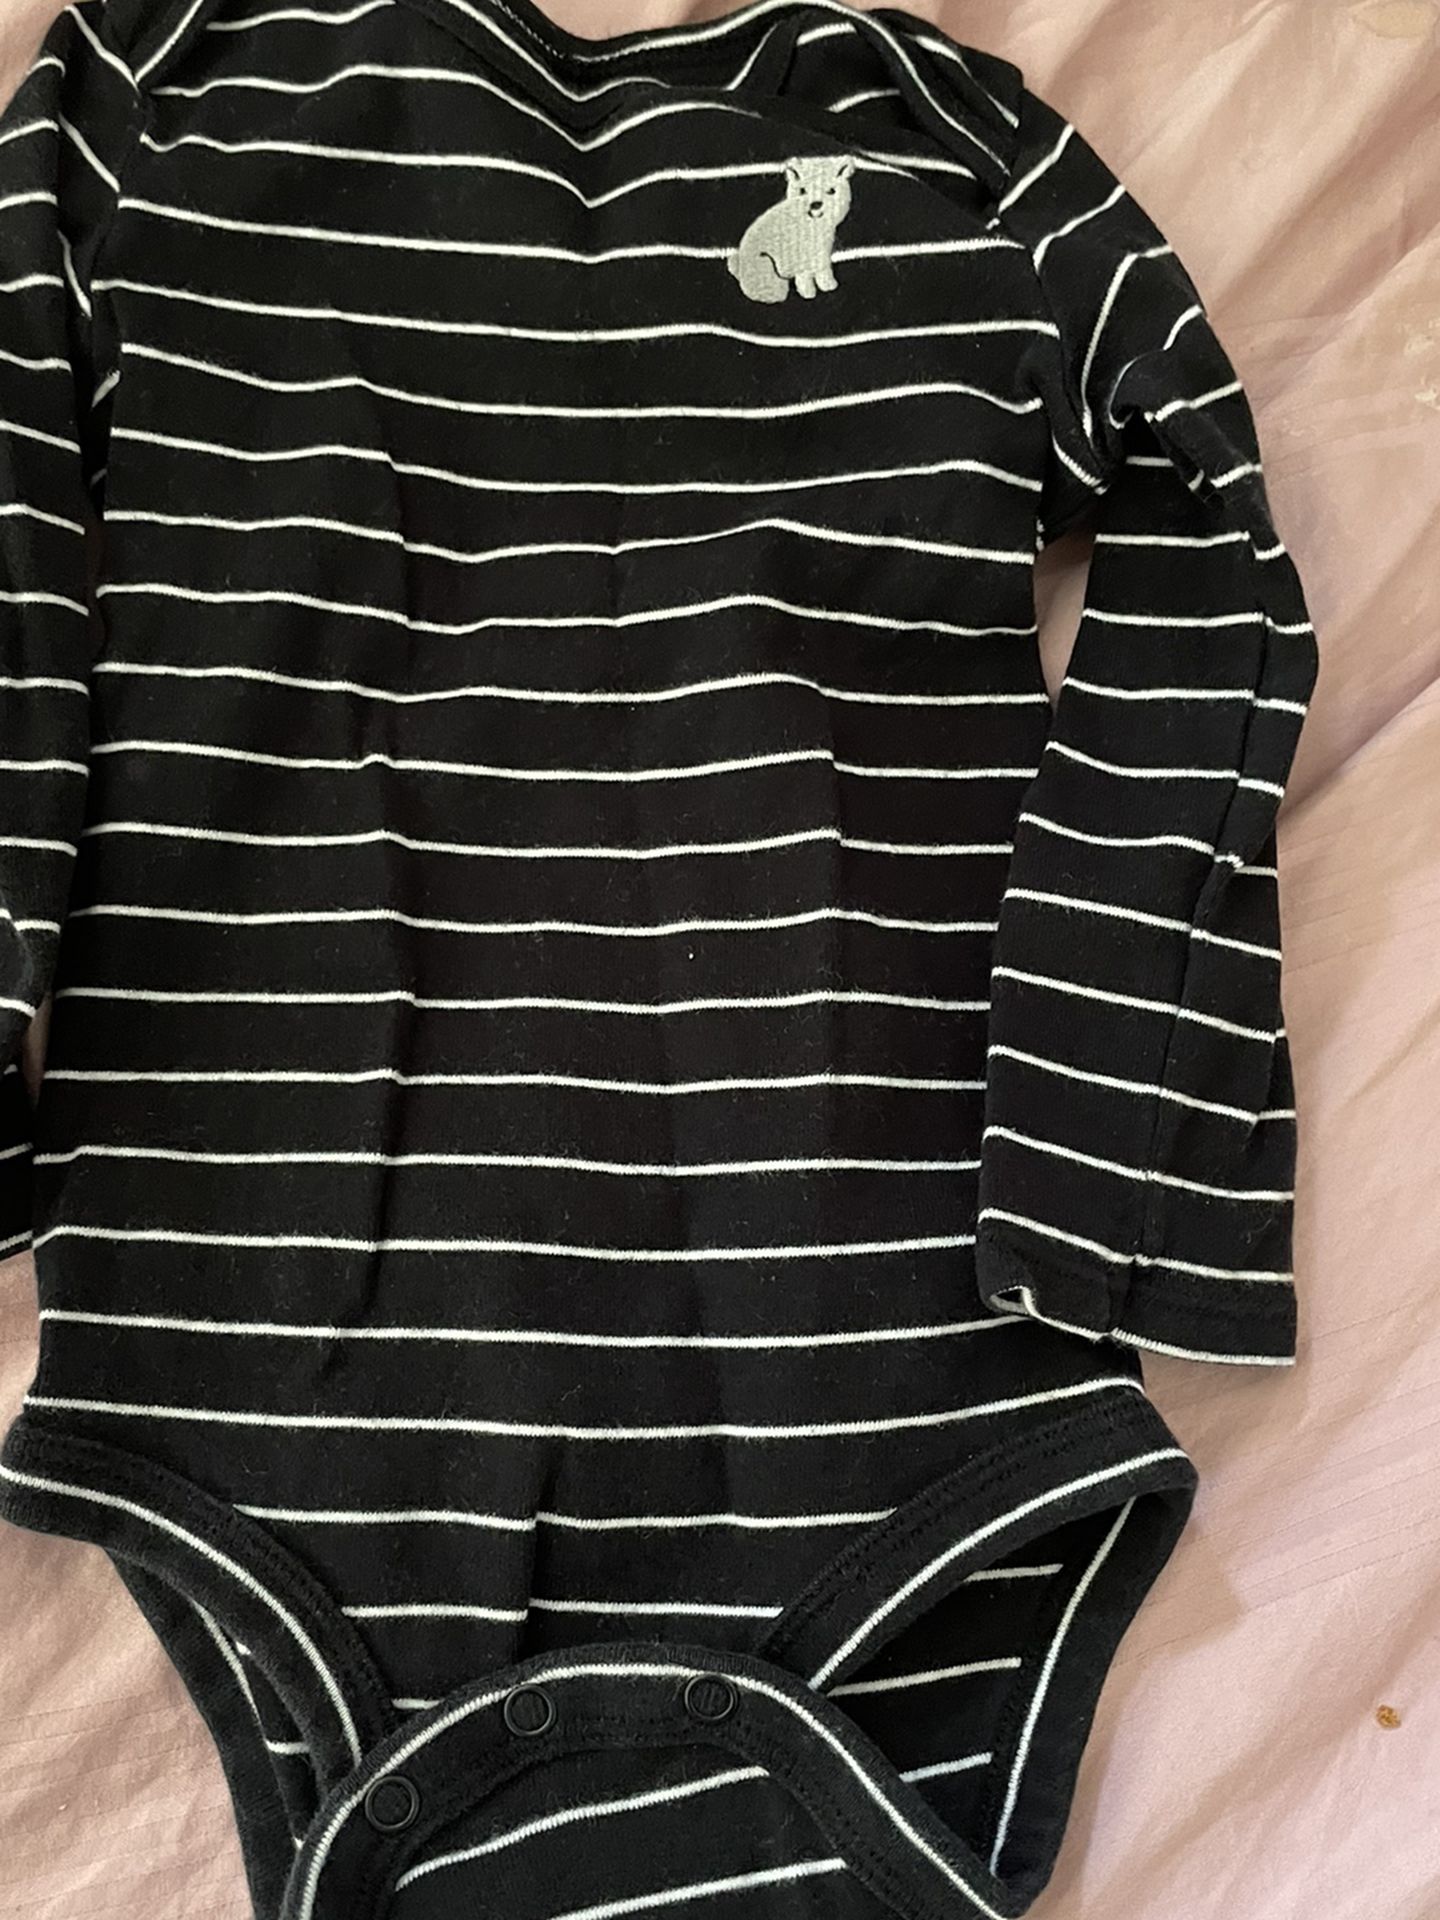 Long Sleeve onesies All Size 18 Months